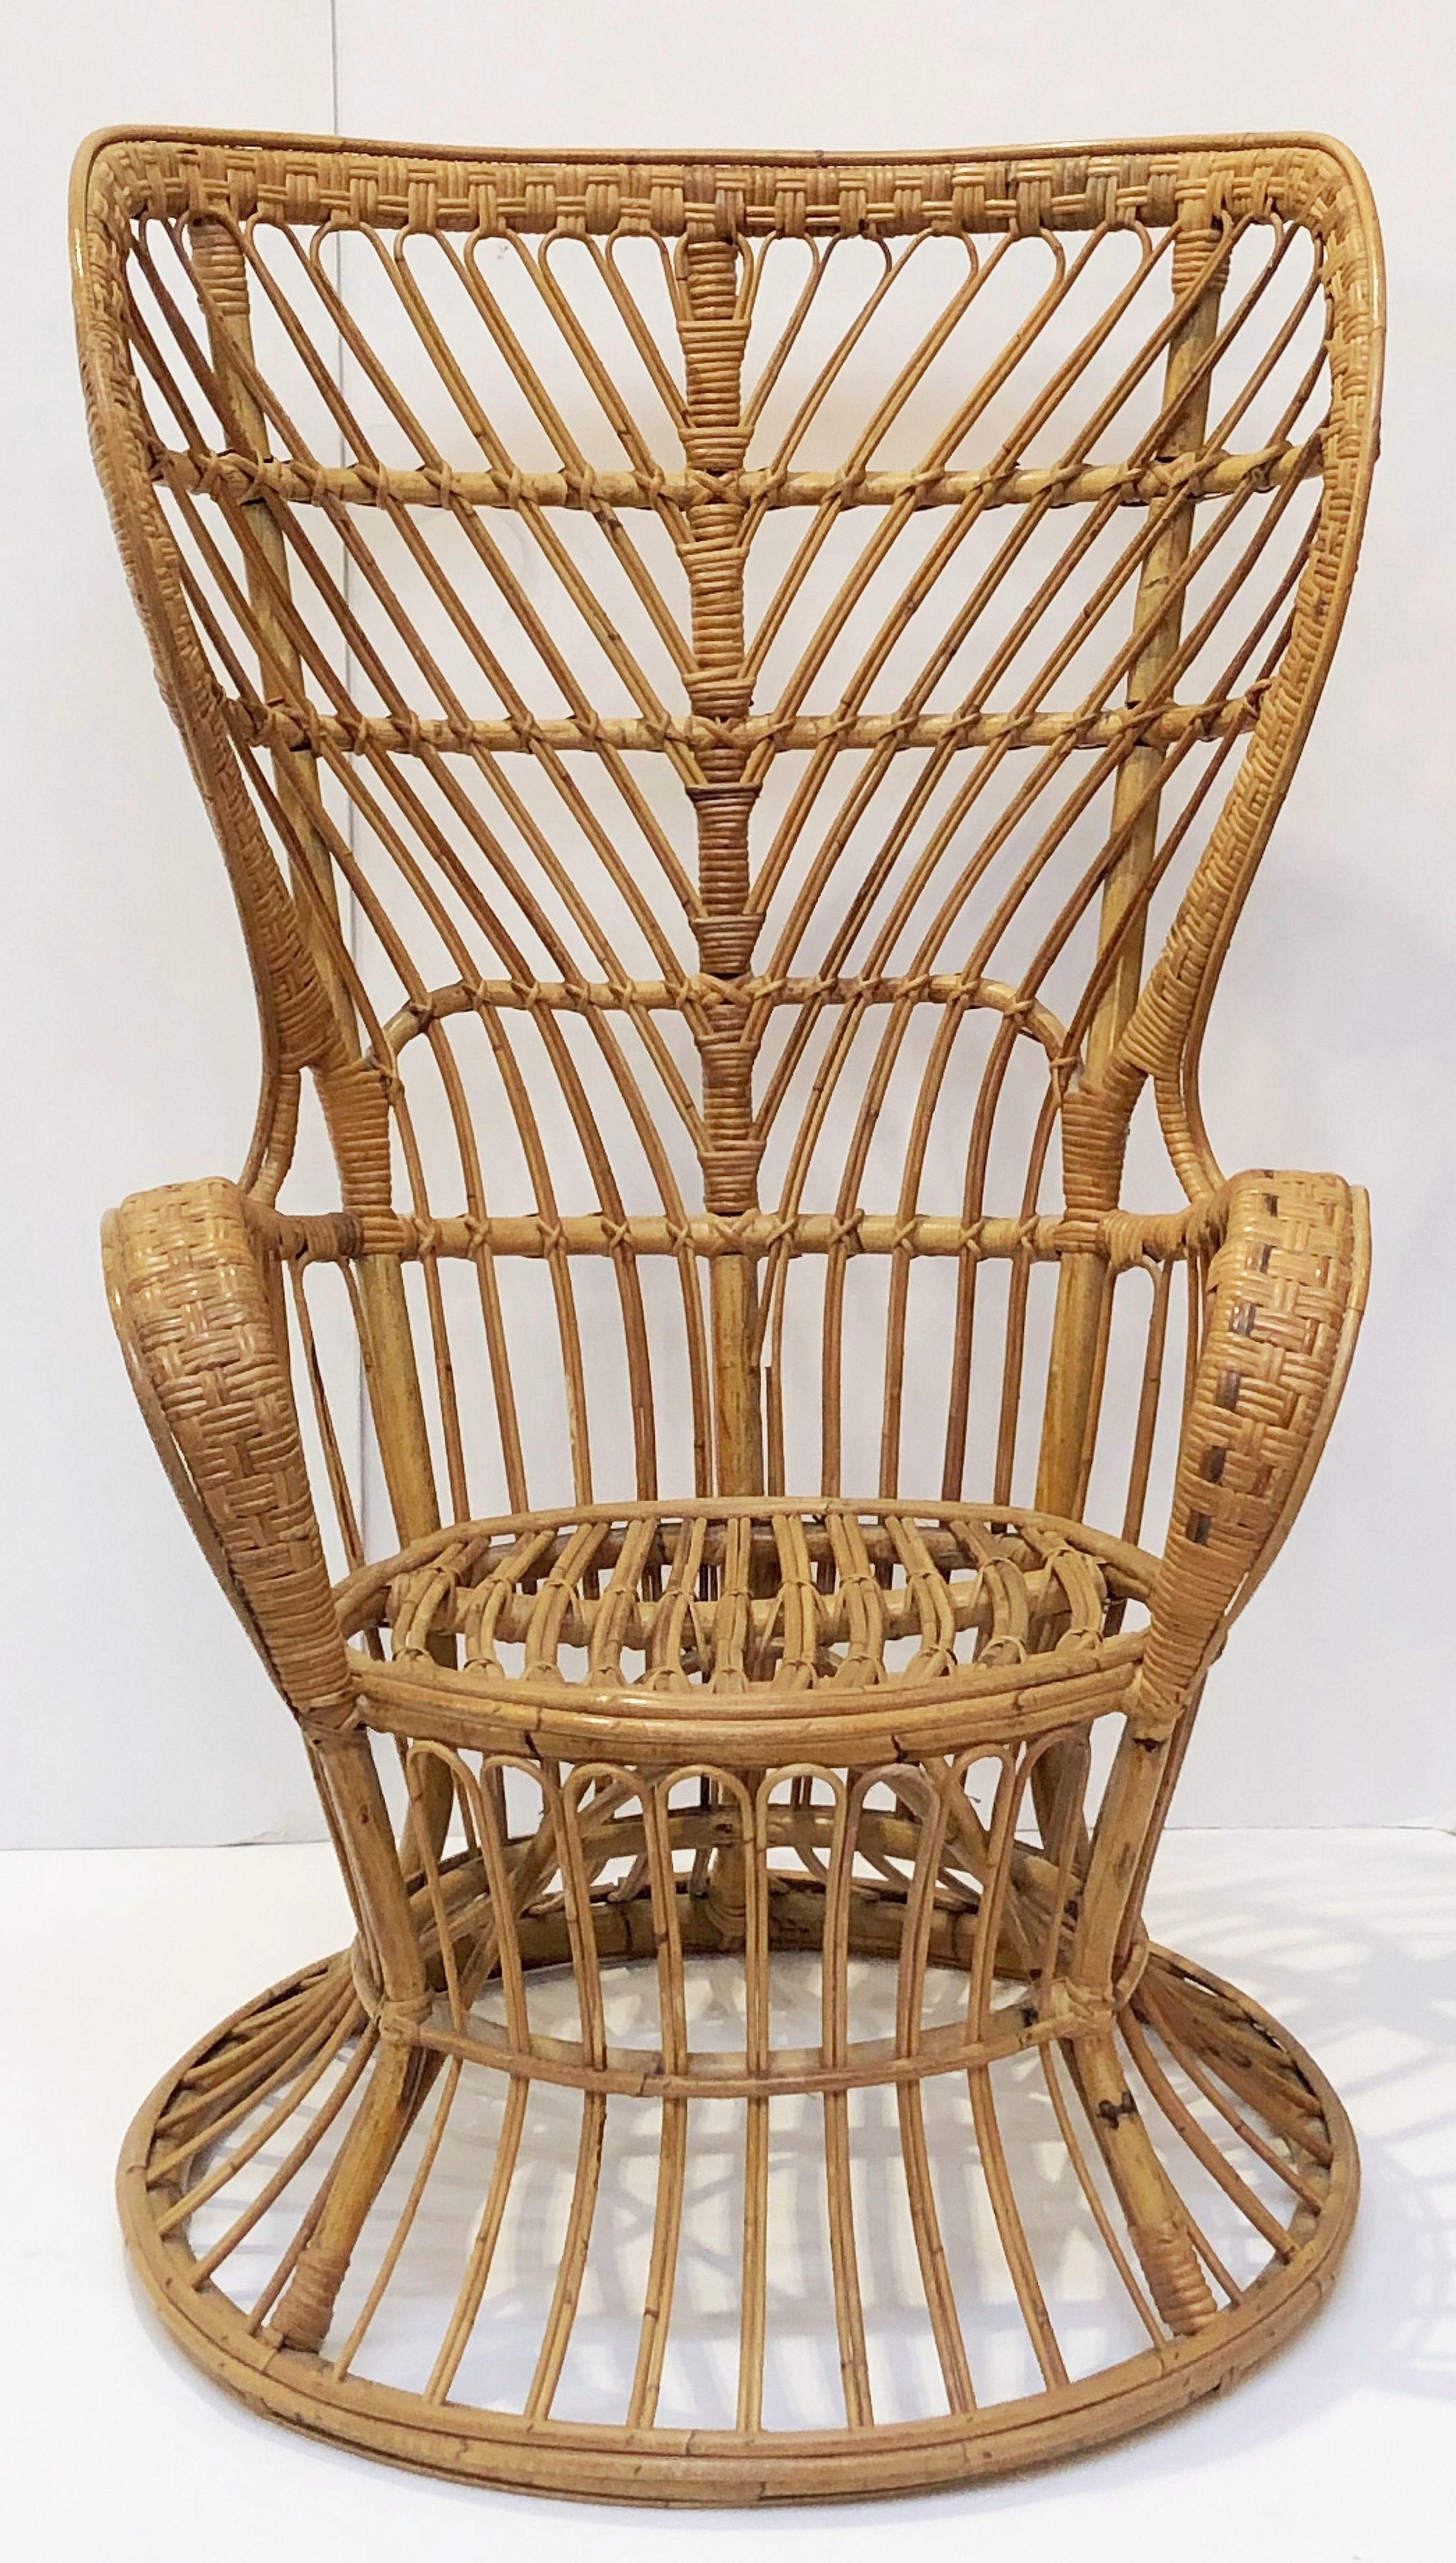 A fine Italian handcrafted mid-century high back rattan and bamboo armchair or lounge chair of the style originally designed for the cruise ship Conte Biancamano by Lio Carminati and Gio Ponti in the 1950s and manufactured by Pierantonio Bonacina.